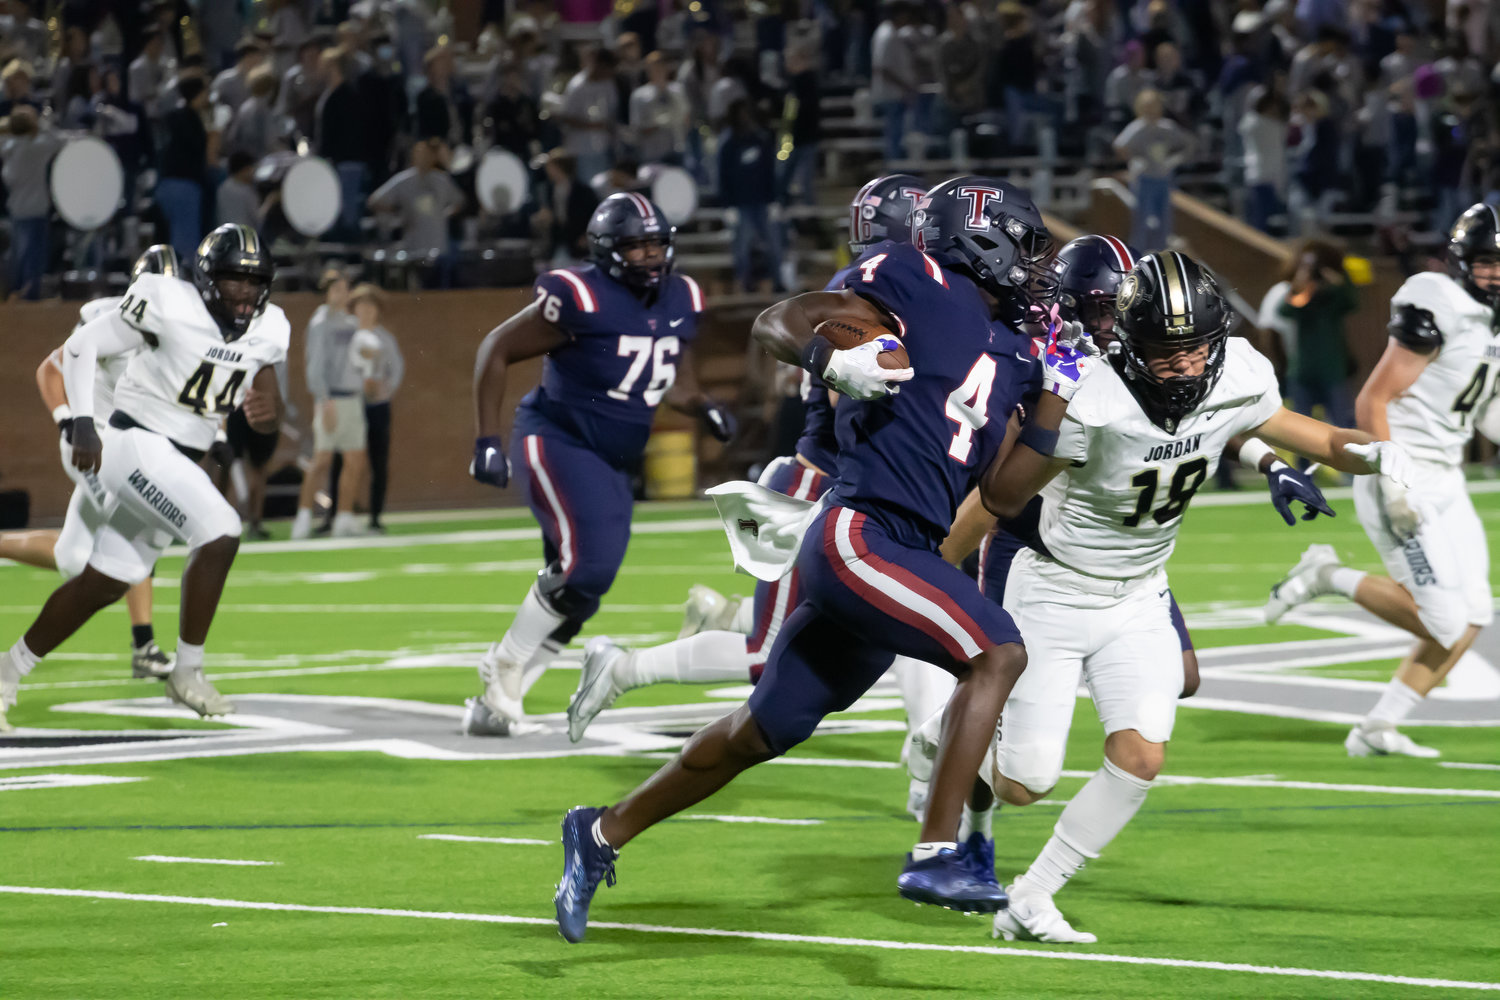 Tompkins' Matthew Ogunrin breaks to the outside during Friday's game between Tompkins and Jordan at Rhodes Stadium.